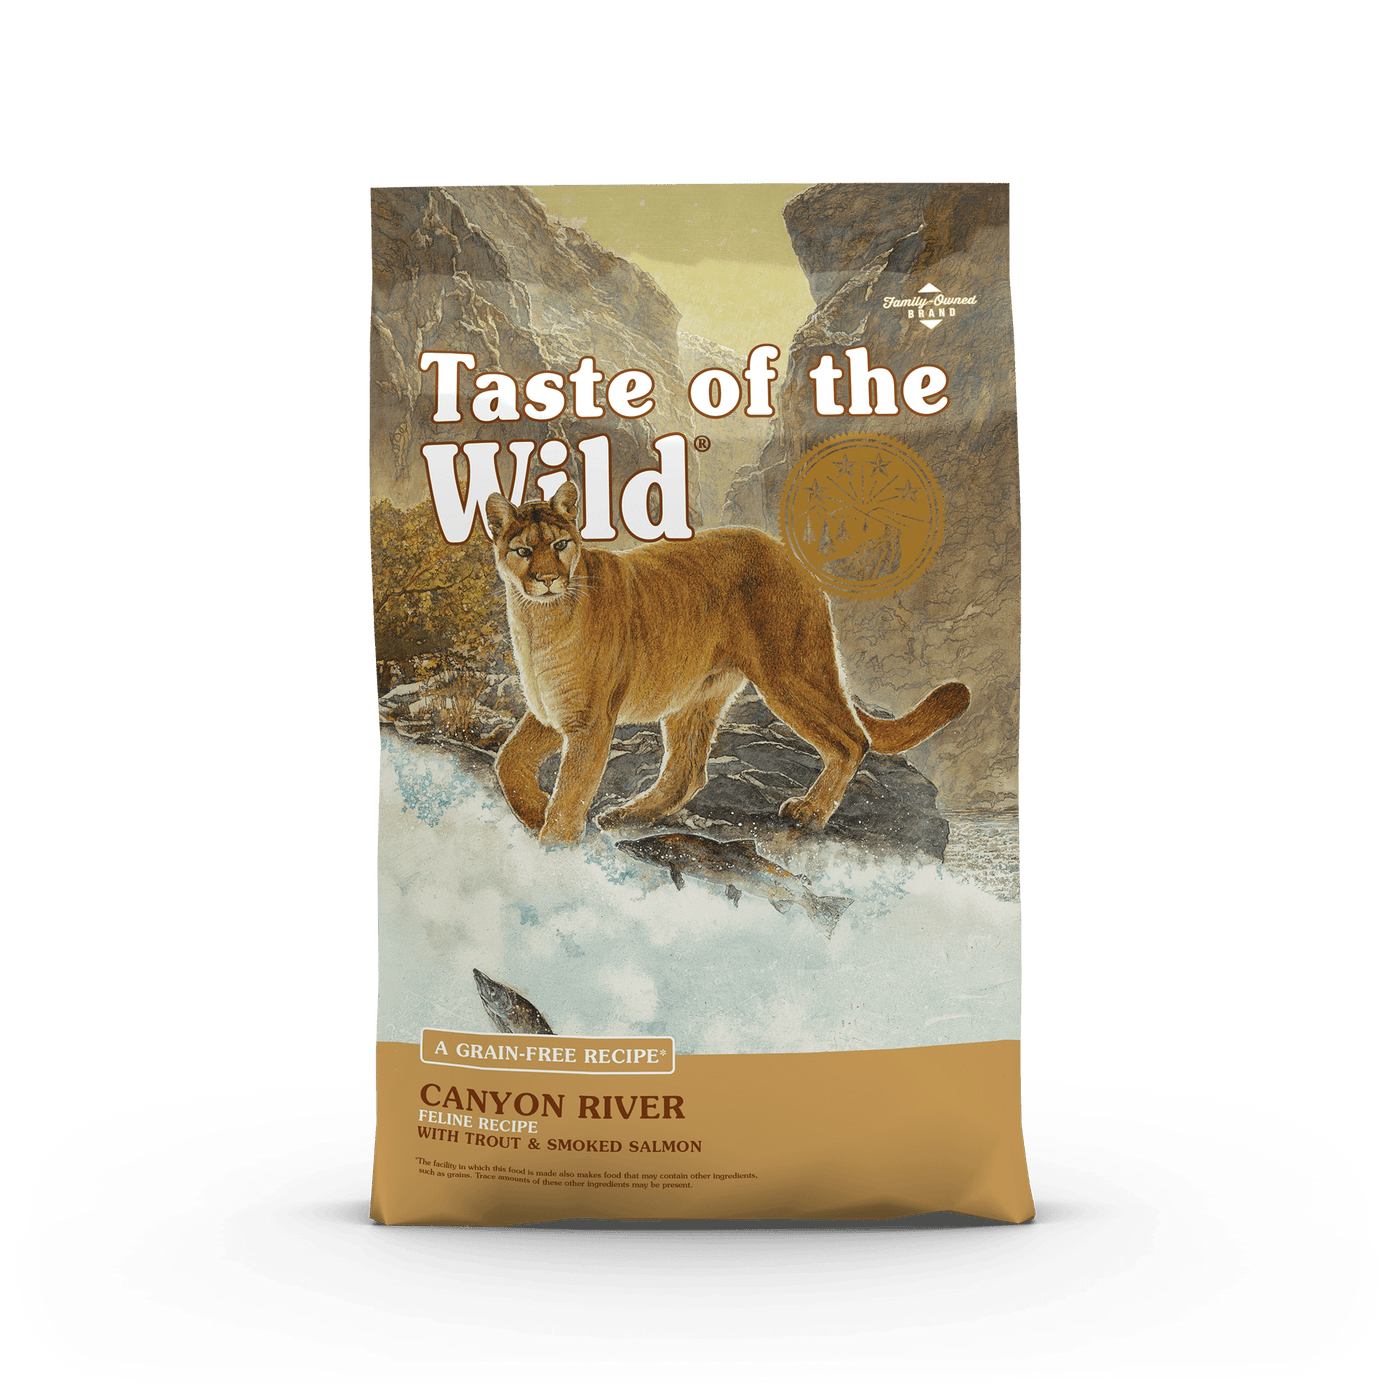 Taste of the Wild Cats- Canyon River with Trout & Smoked Salmon Dry Food